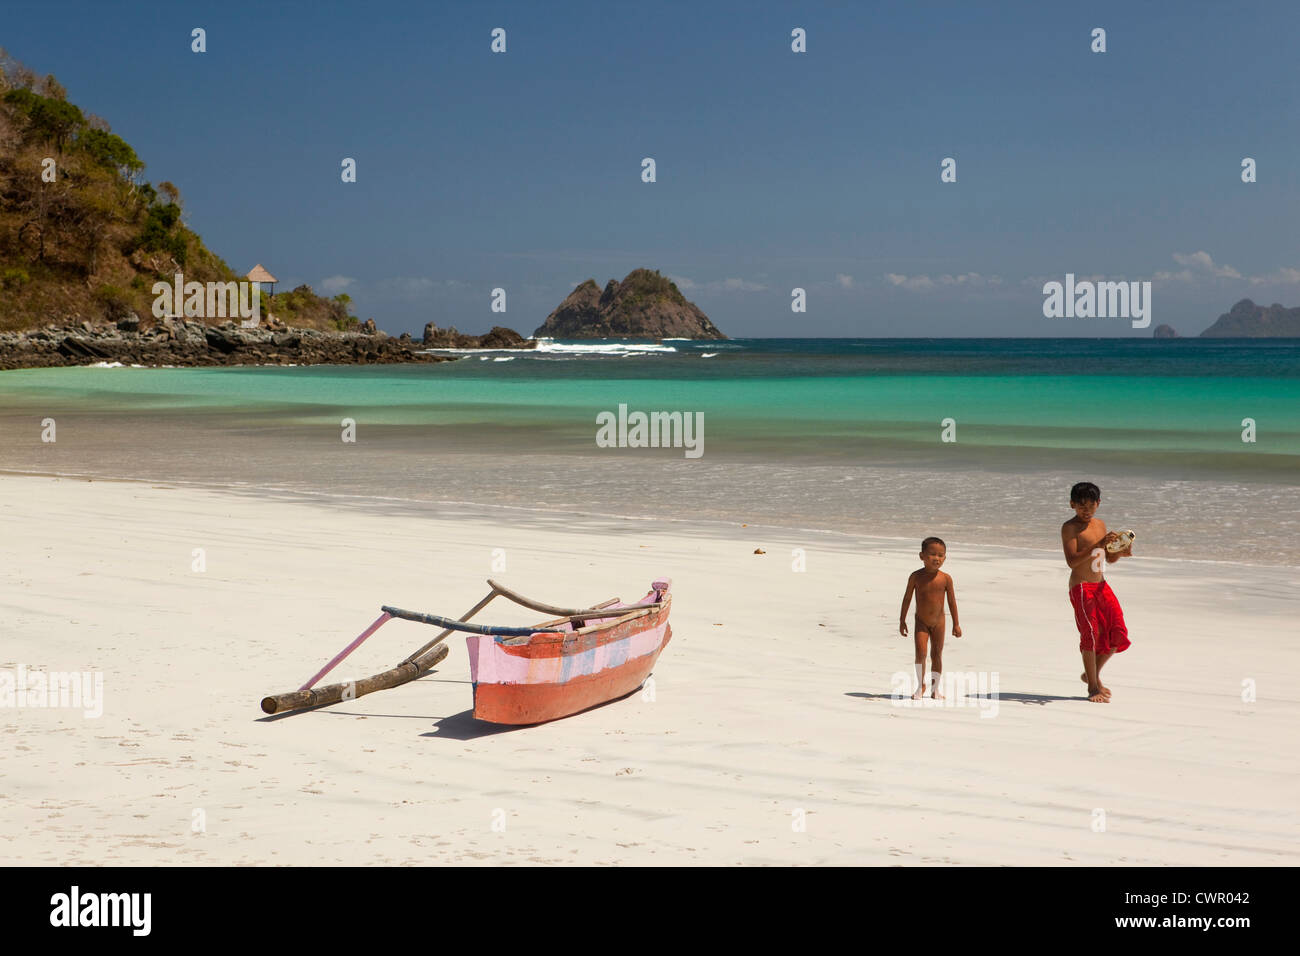 Indonesia, Lombok, South Coast, Seong Blanak, two young boys on the beach Stock Photo